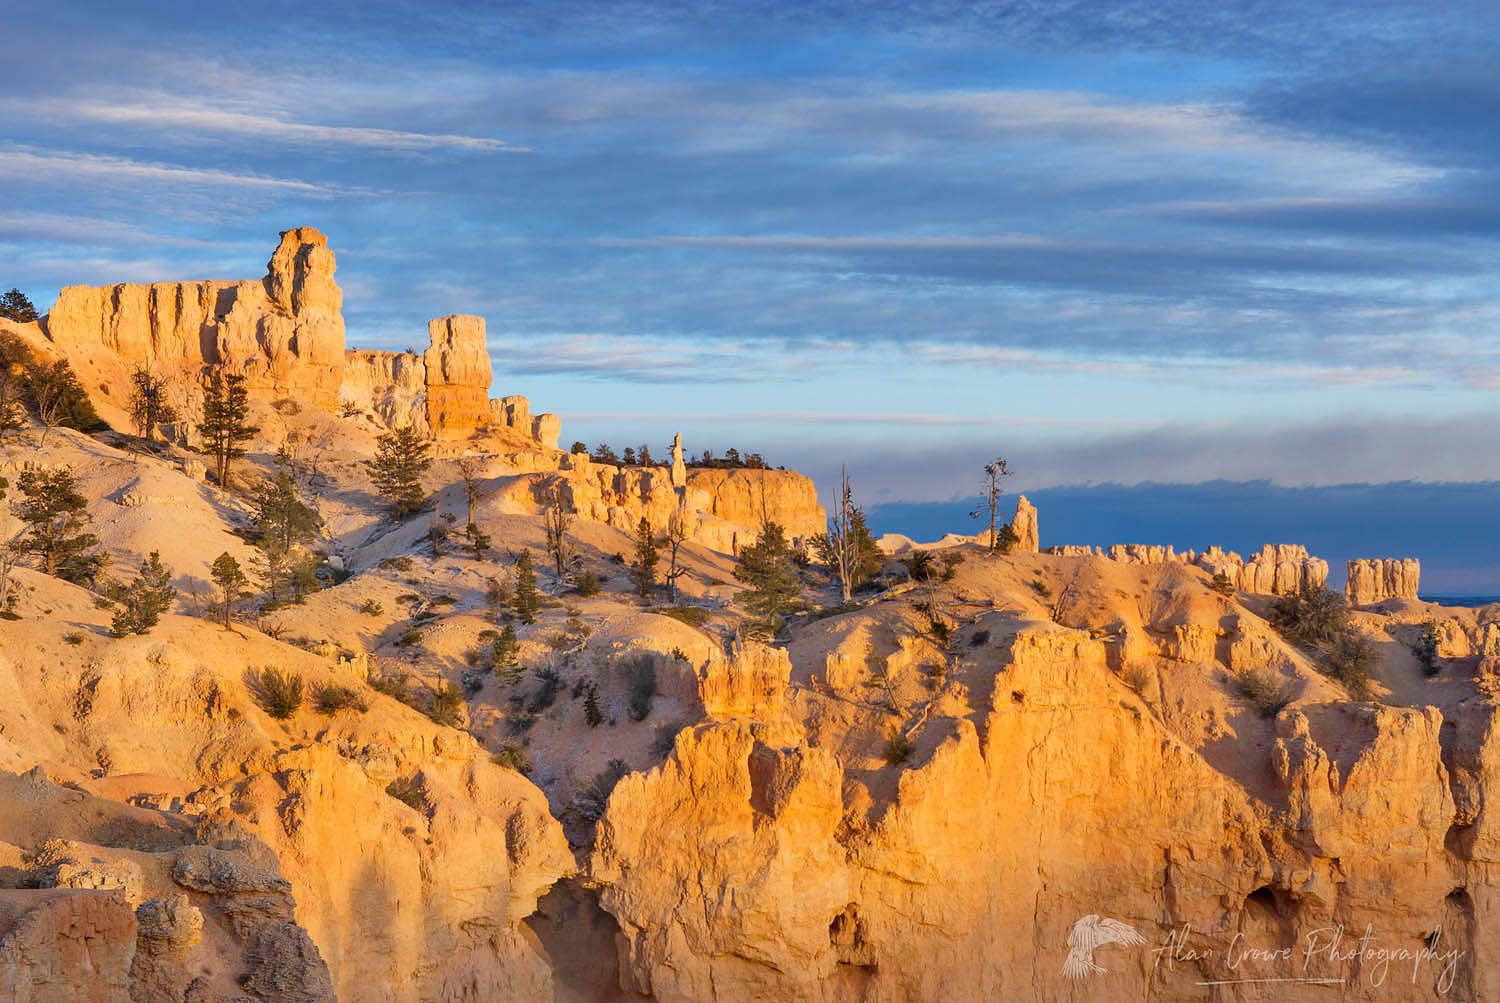 Setting sun on cliffs of Bryce Canyon from Paria View, Bryce Canyon National Park #31306